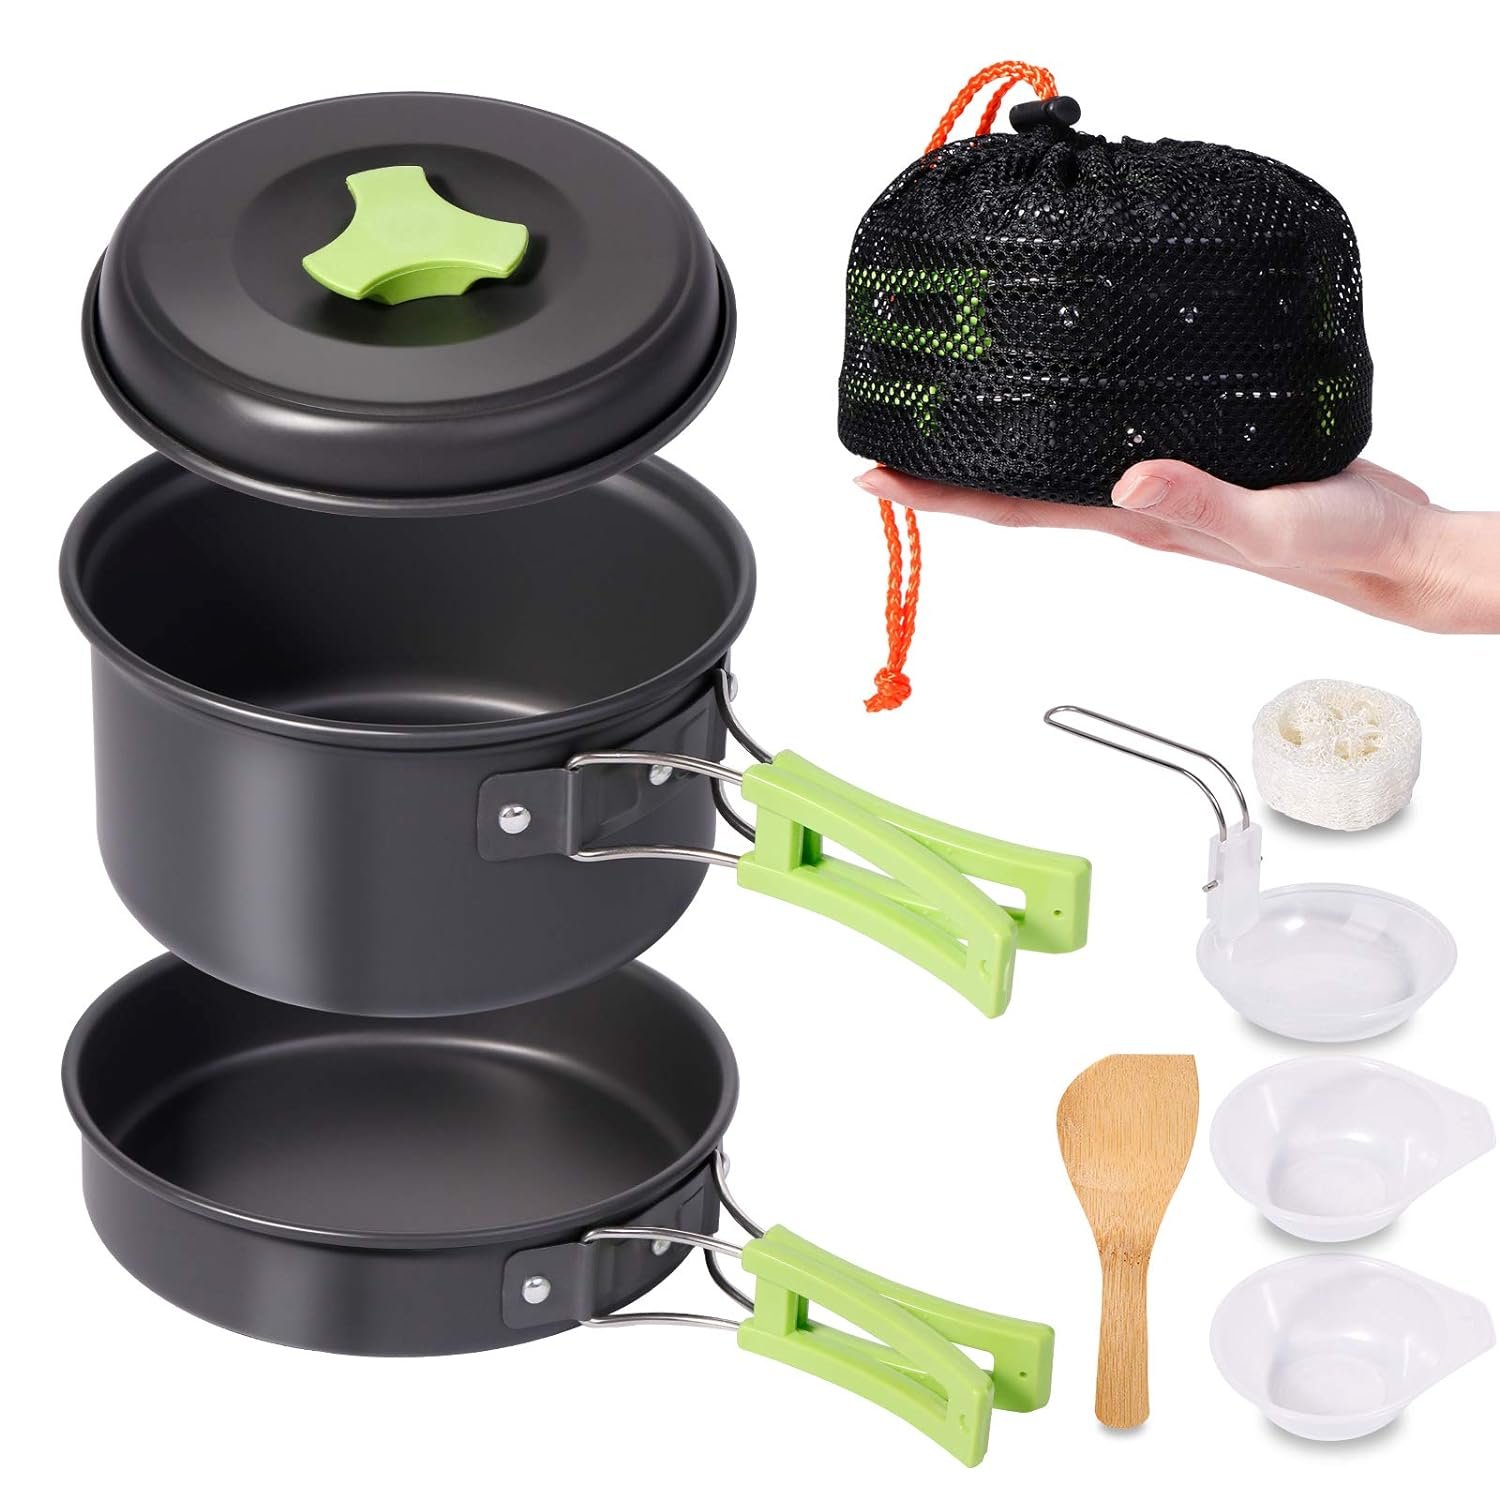 REHTRAD 8 Pcs Camping Cooking Set, Camping Accessories for Outdoor, Camping Utensils with Carry Bag, Camping Bowl Pot Pan Set